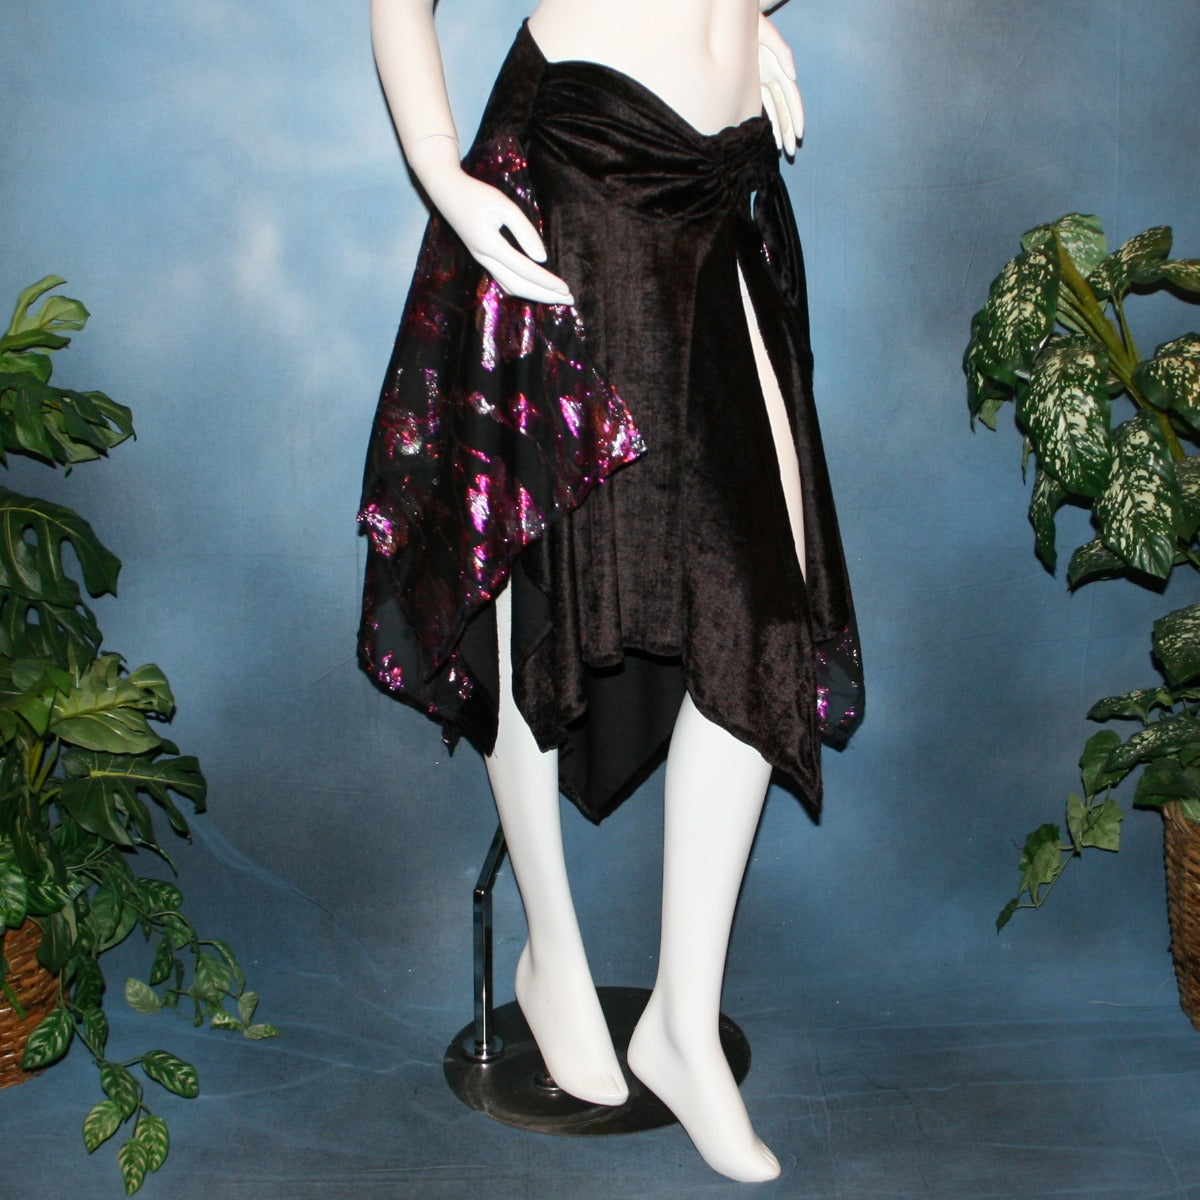 Crystal's Creations Black Latin/rhythm skirt, wrap style,with scarf cut panels was created with yards of a black & fuchsia metallic cut & clip chiffon on a panne' velvet base with ruching & sash.